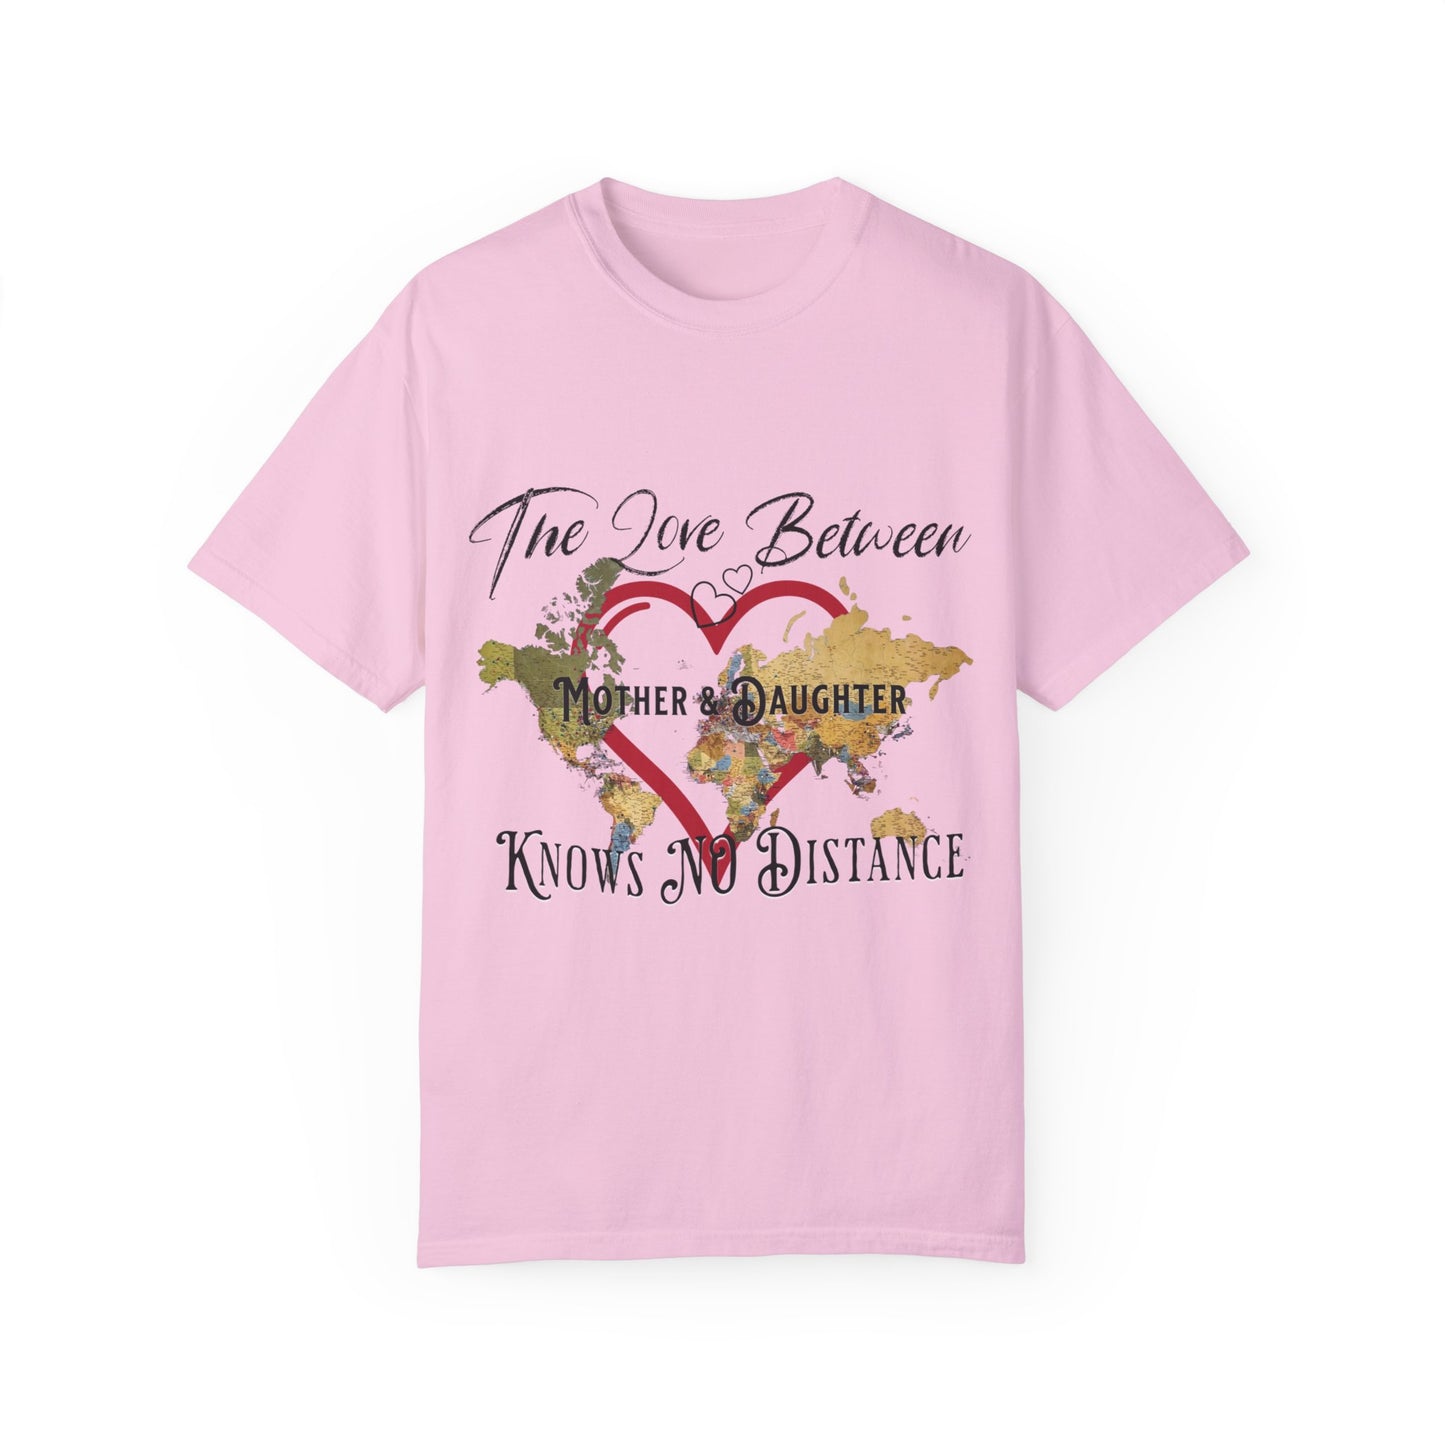 The love between mother and daughter knows no distance - Unisex Garment-Dyed T-shirt